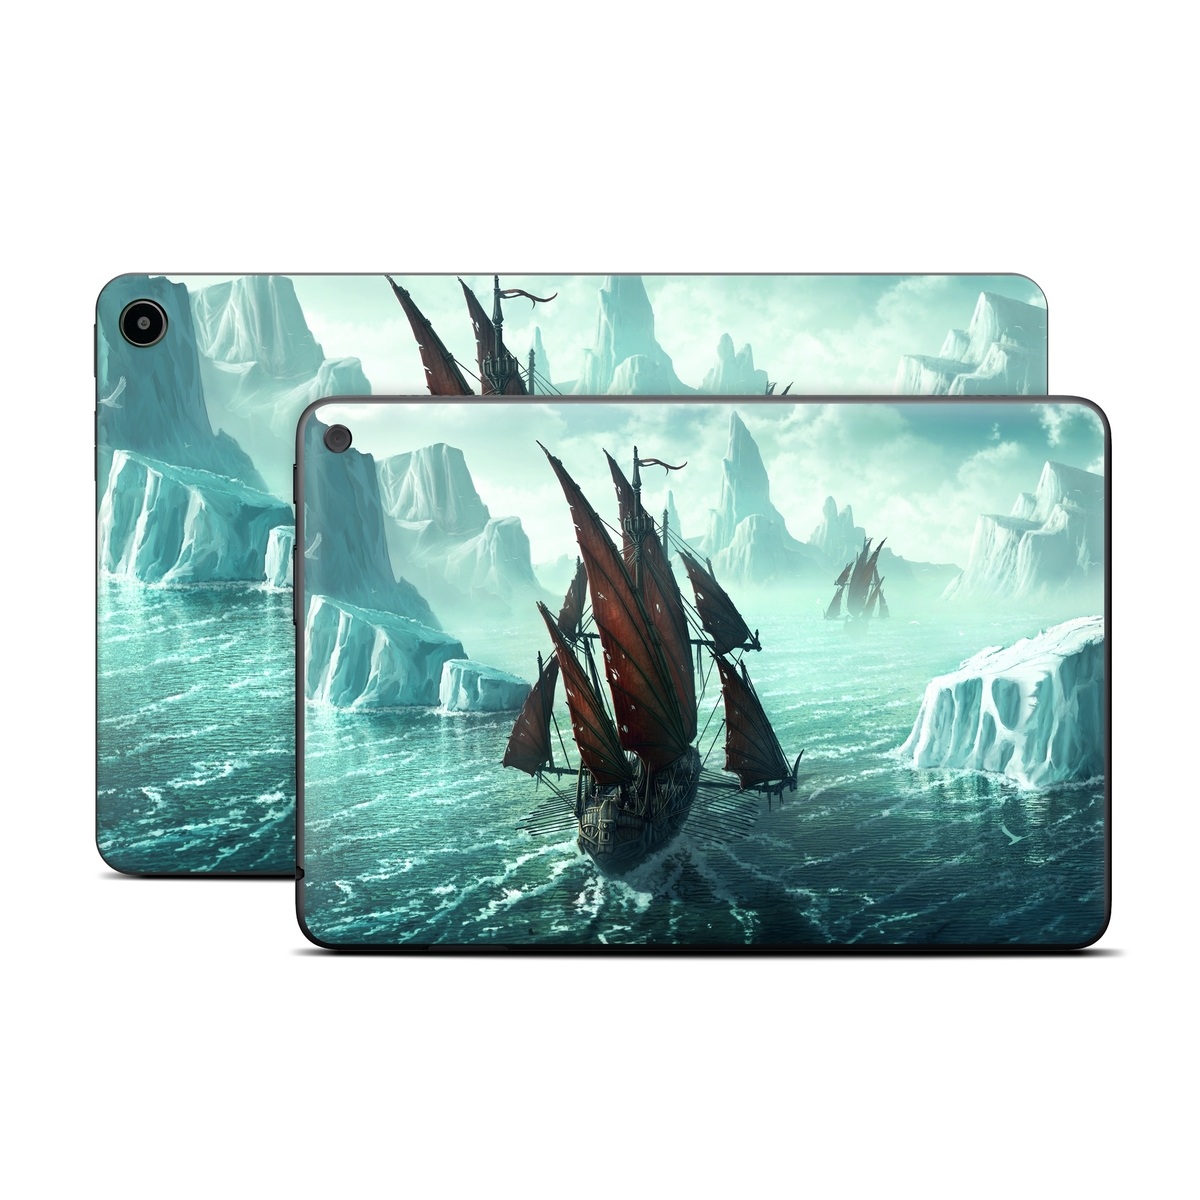 Amazon Fire Tablet Series Skin Skin design of Cg artwork, Vehicle, Ghost ship, Manila galleon, Fluyt, Adventure game, First-rate, Sailing ship, Mythology, Strategy video game, with gray, black, blue, green, white colors